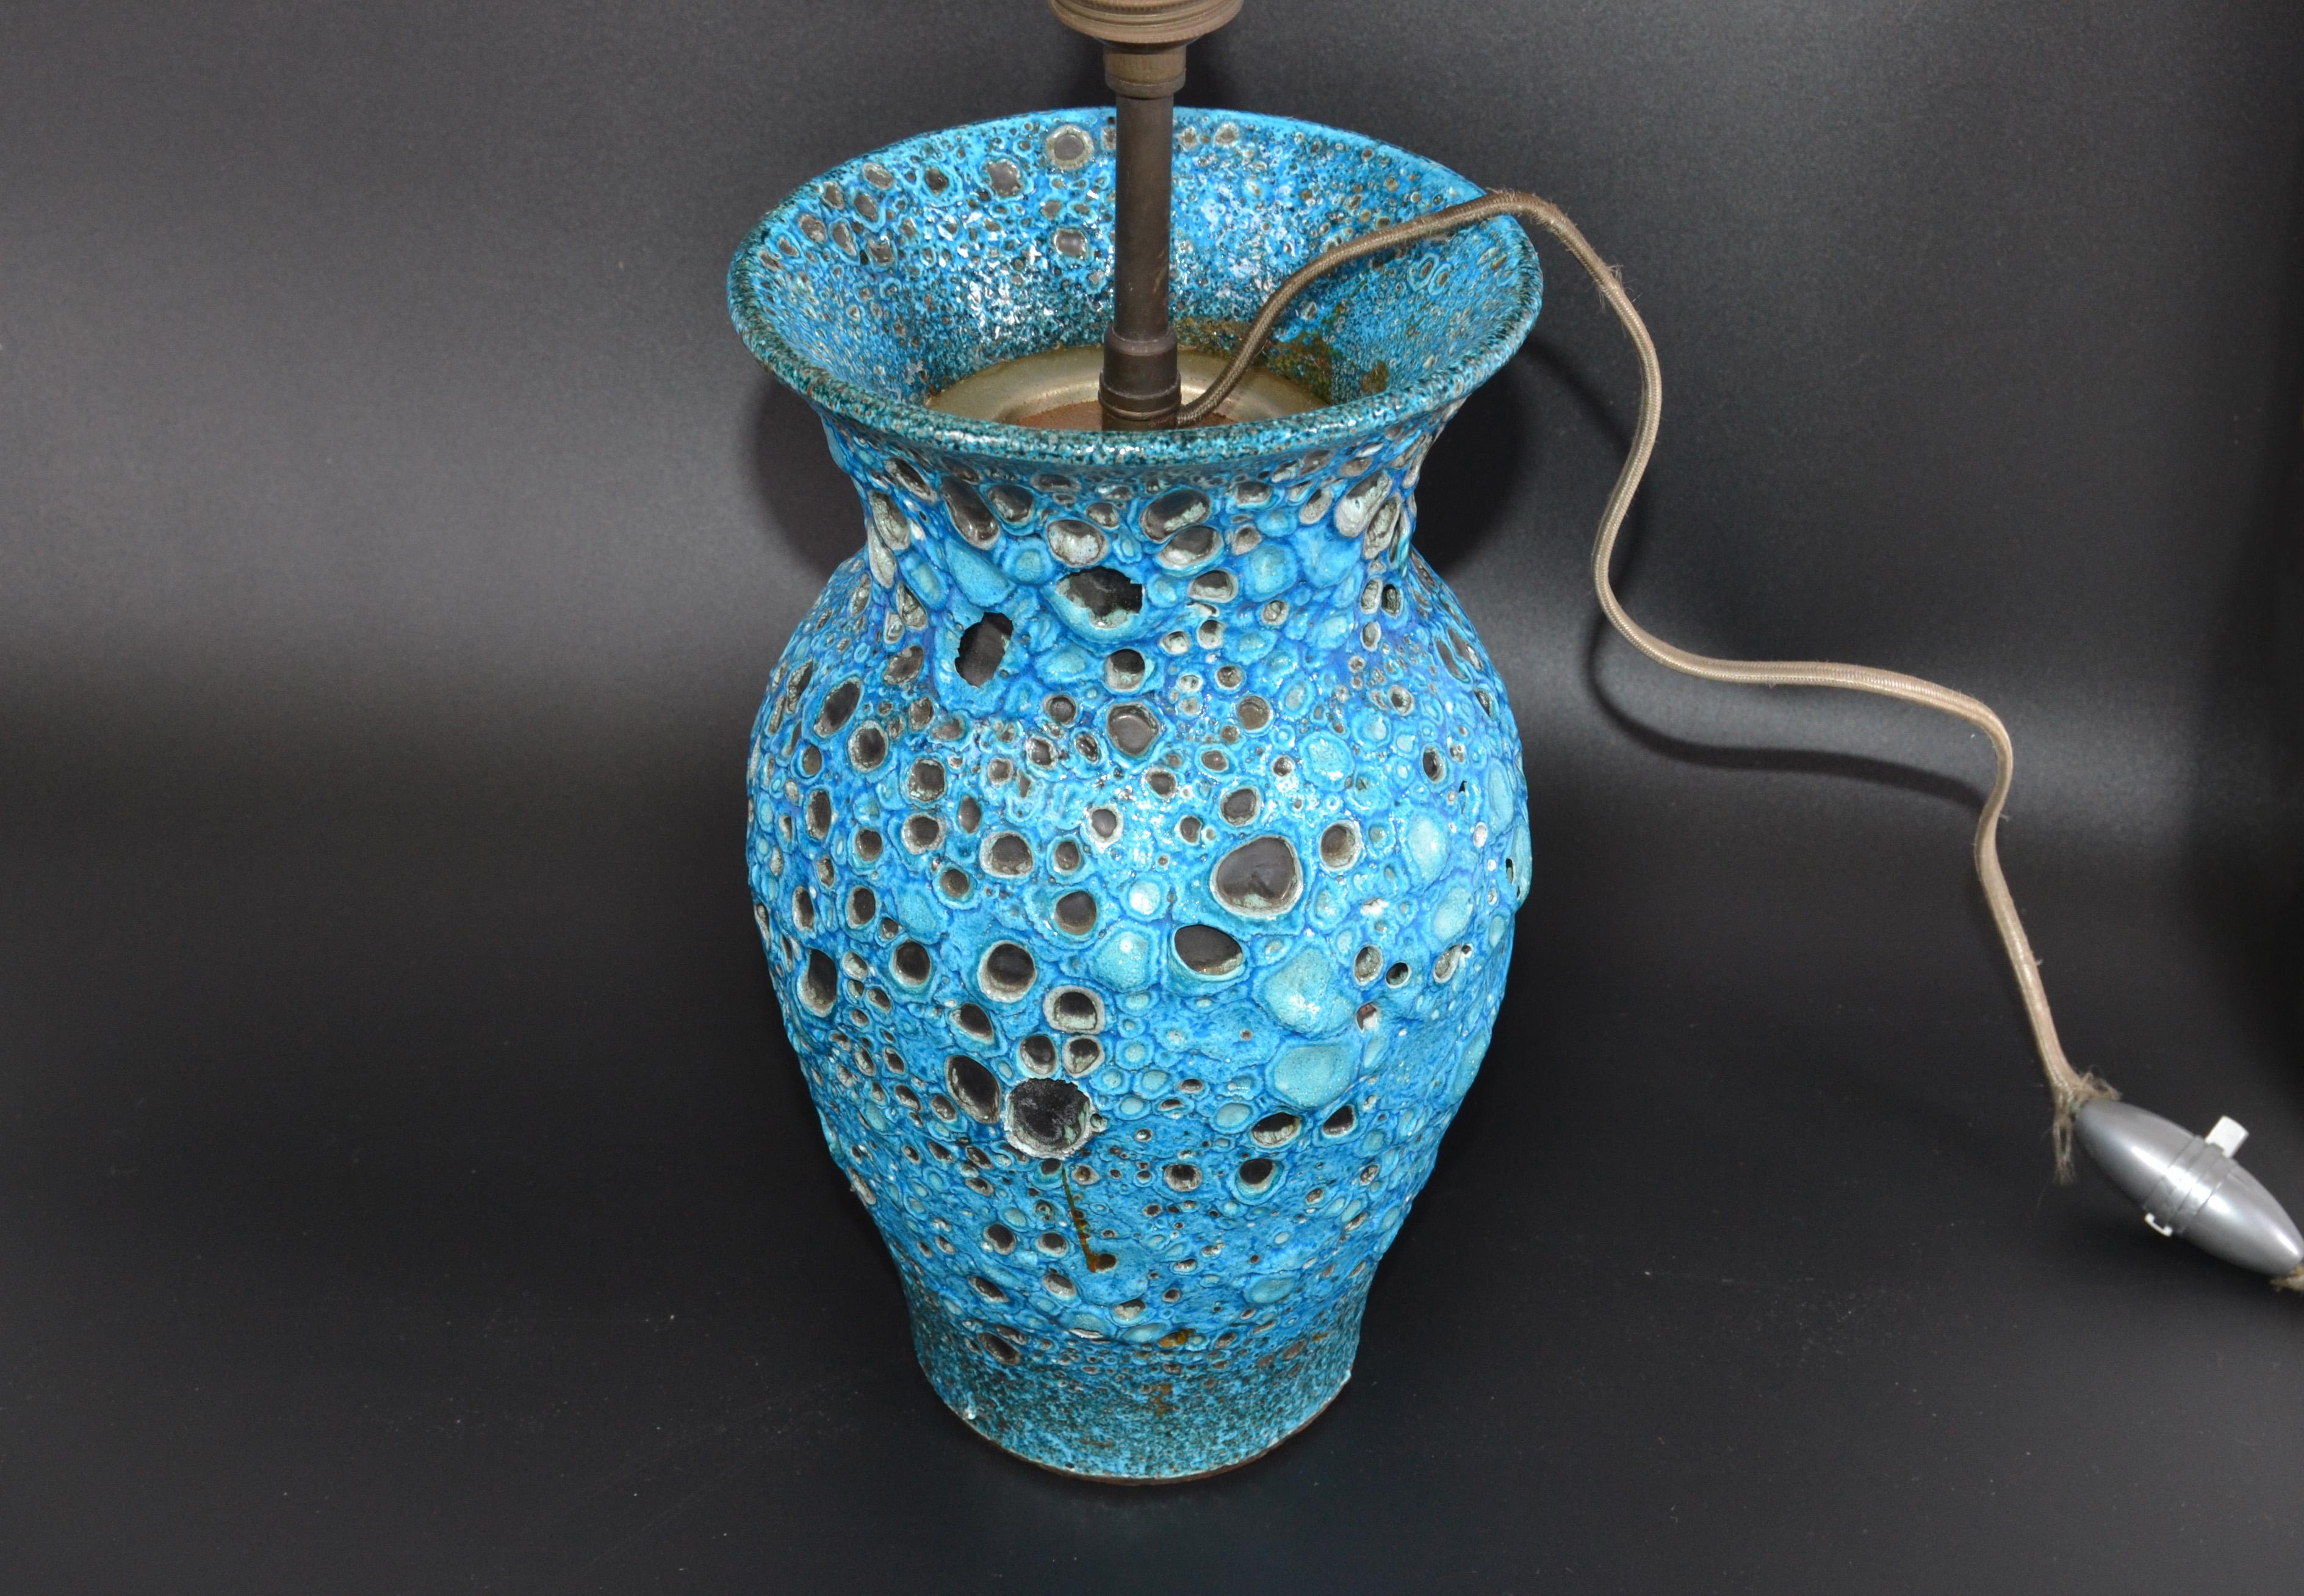 Glazed Vallaurice France Turquoise Glaze Ceramic Table Lamp Pottery Folk Art French For Sale